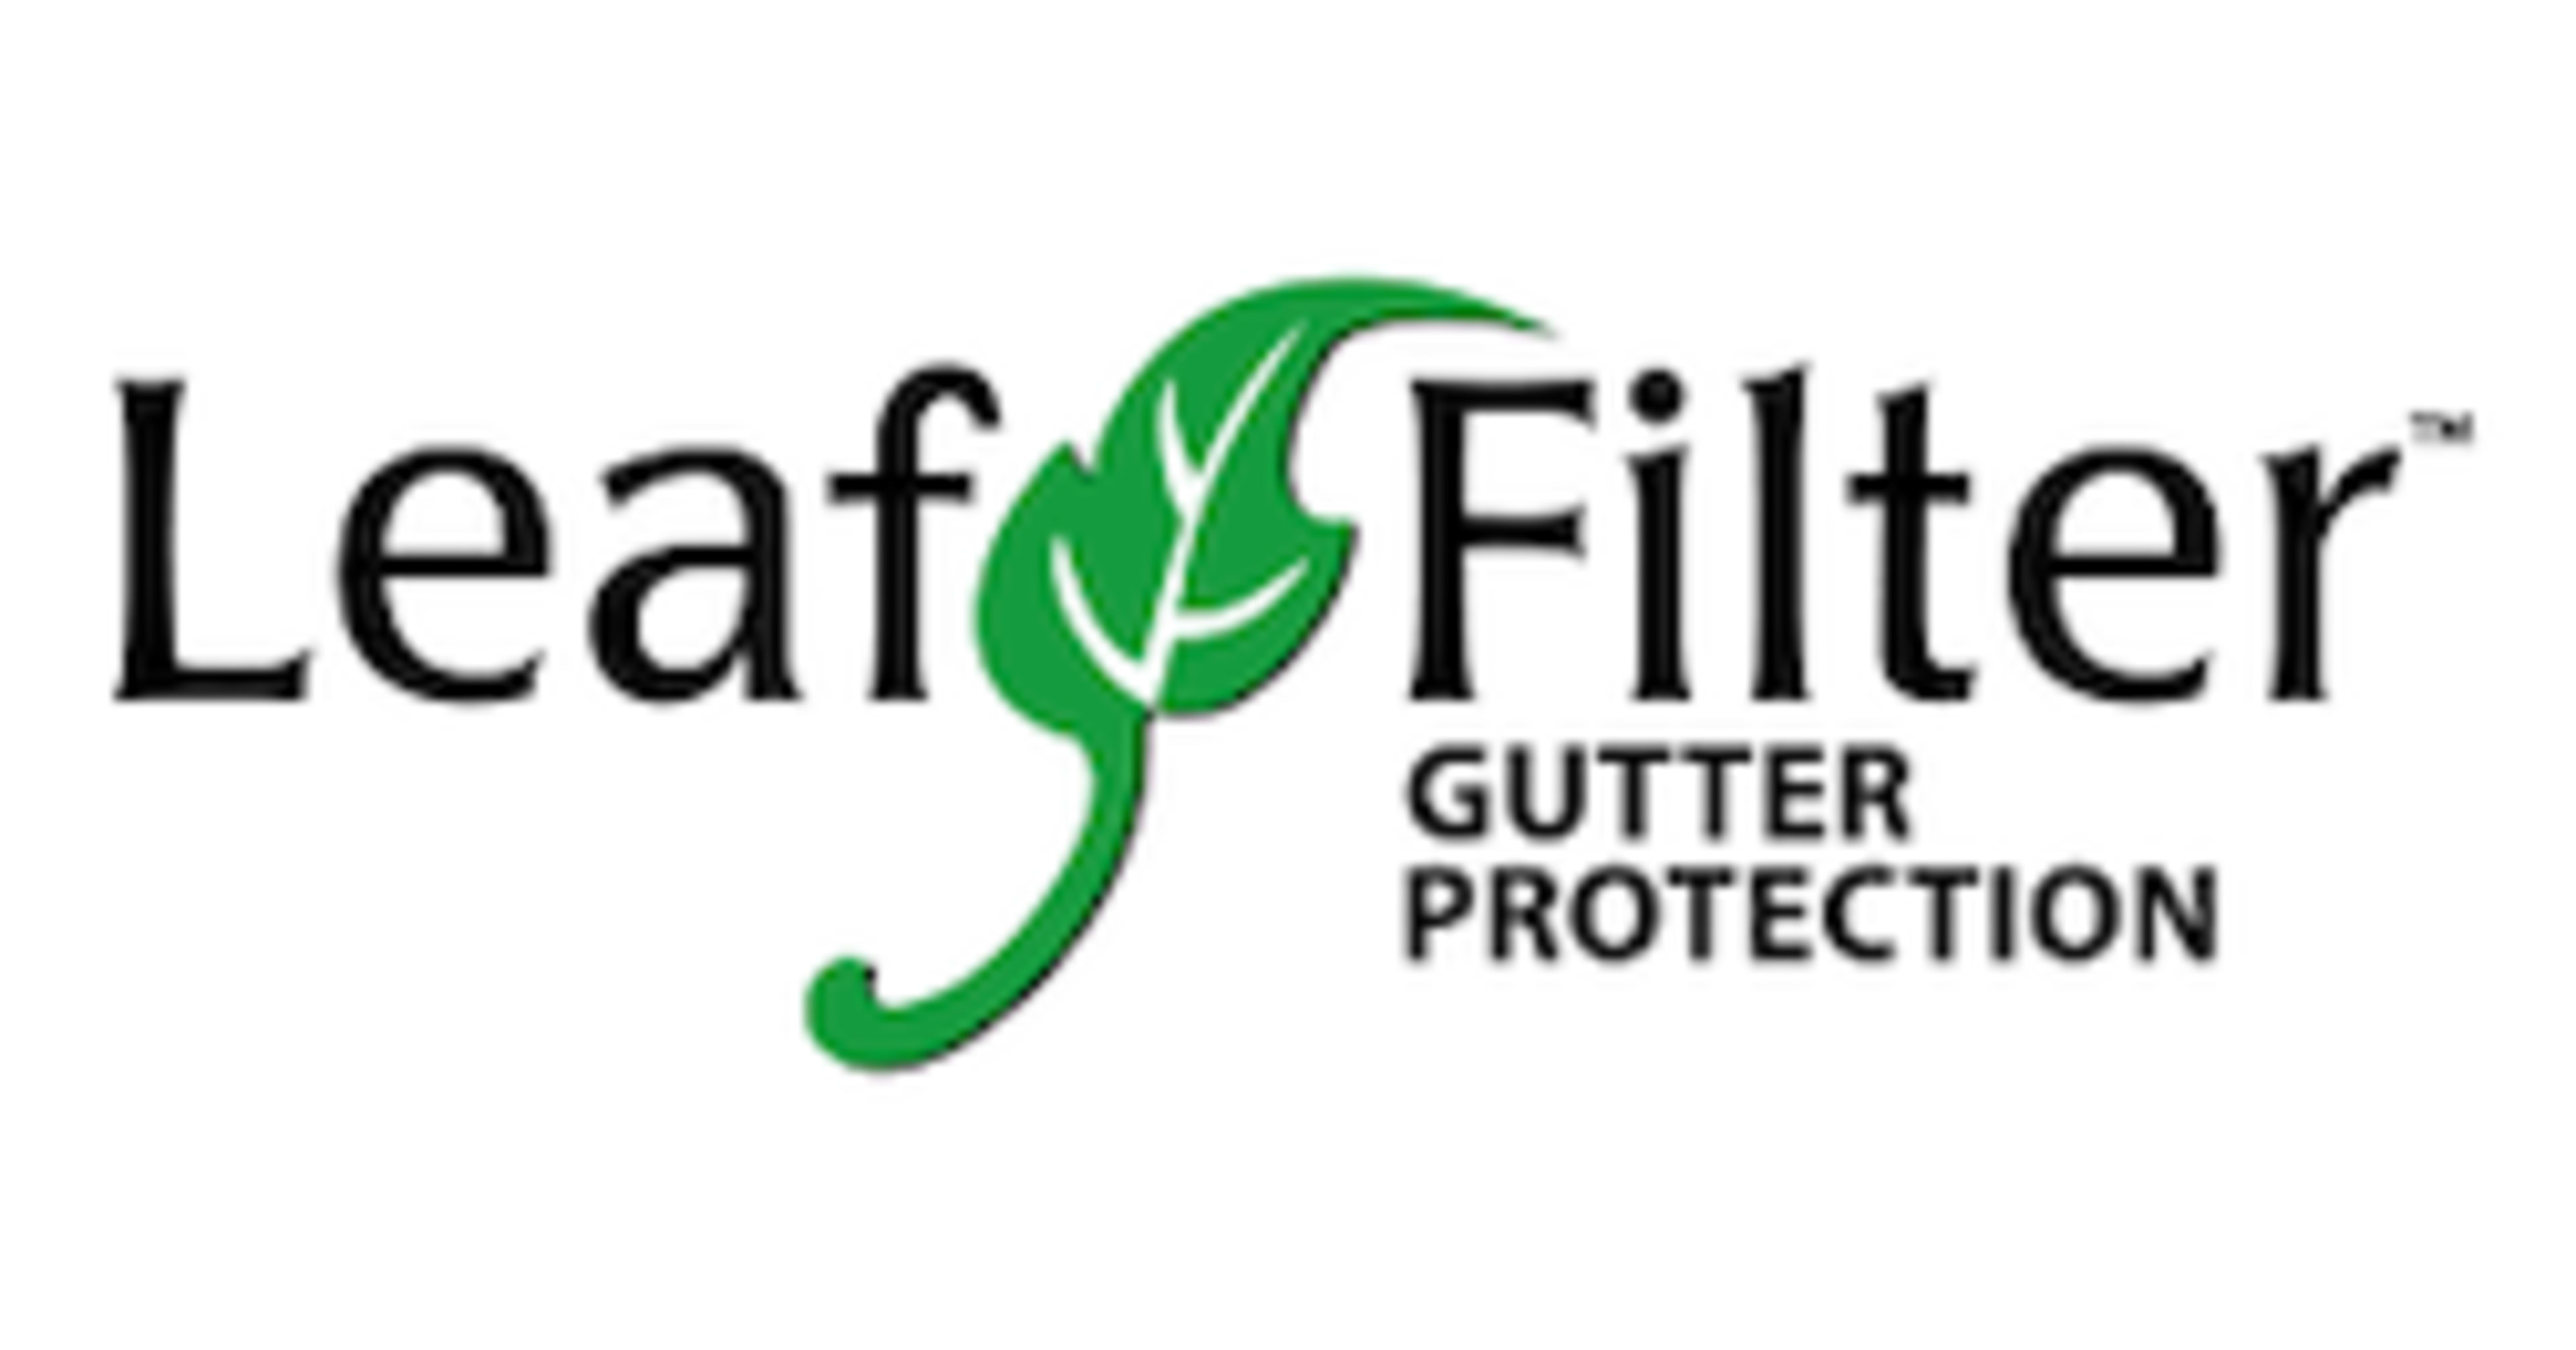 LeafFilter Gutter Protection Code